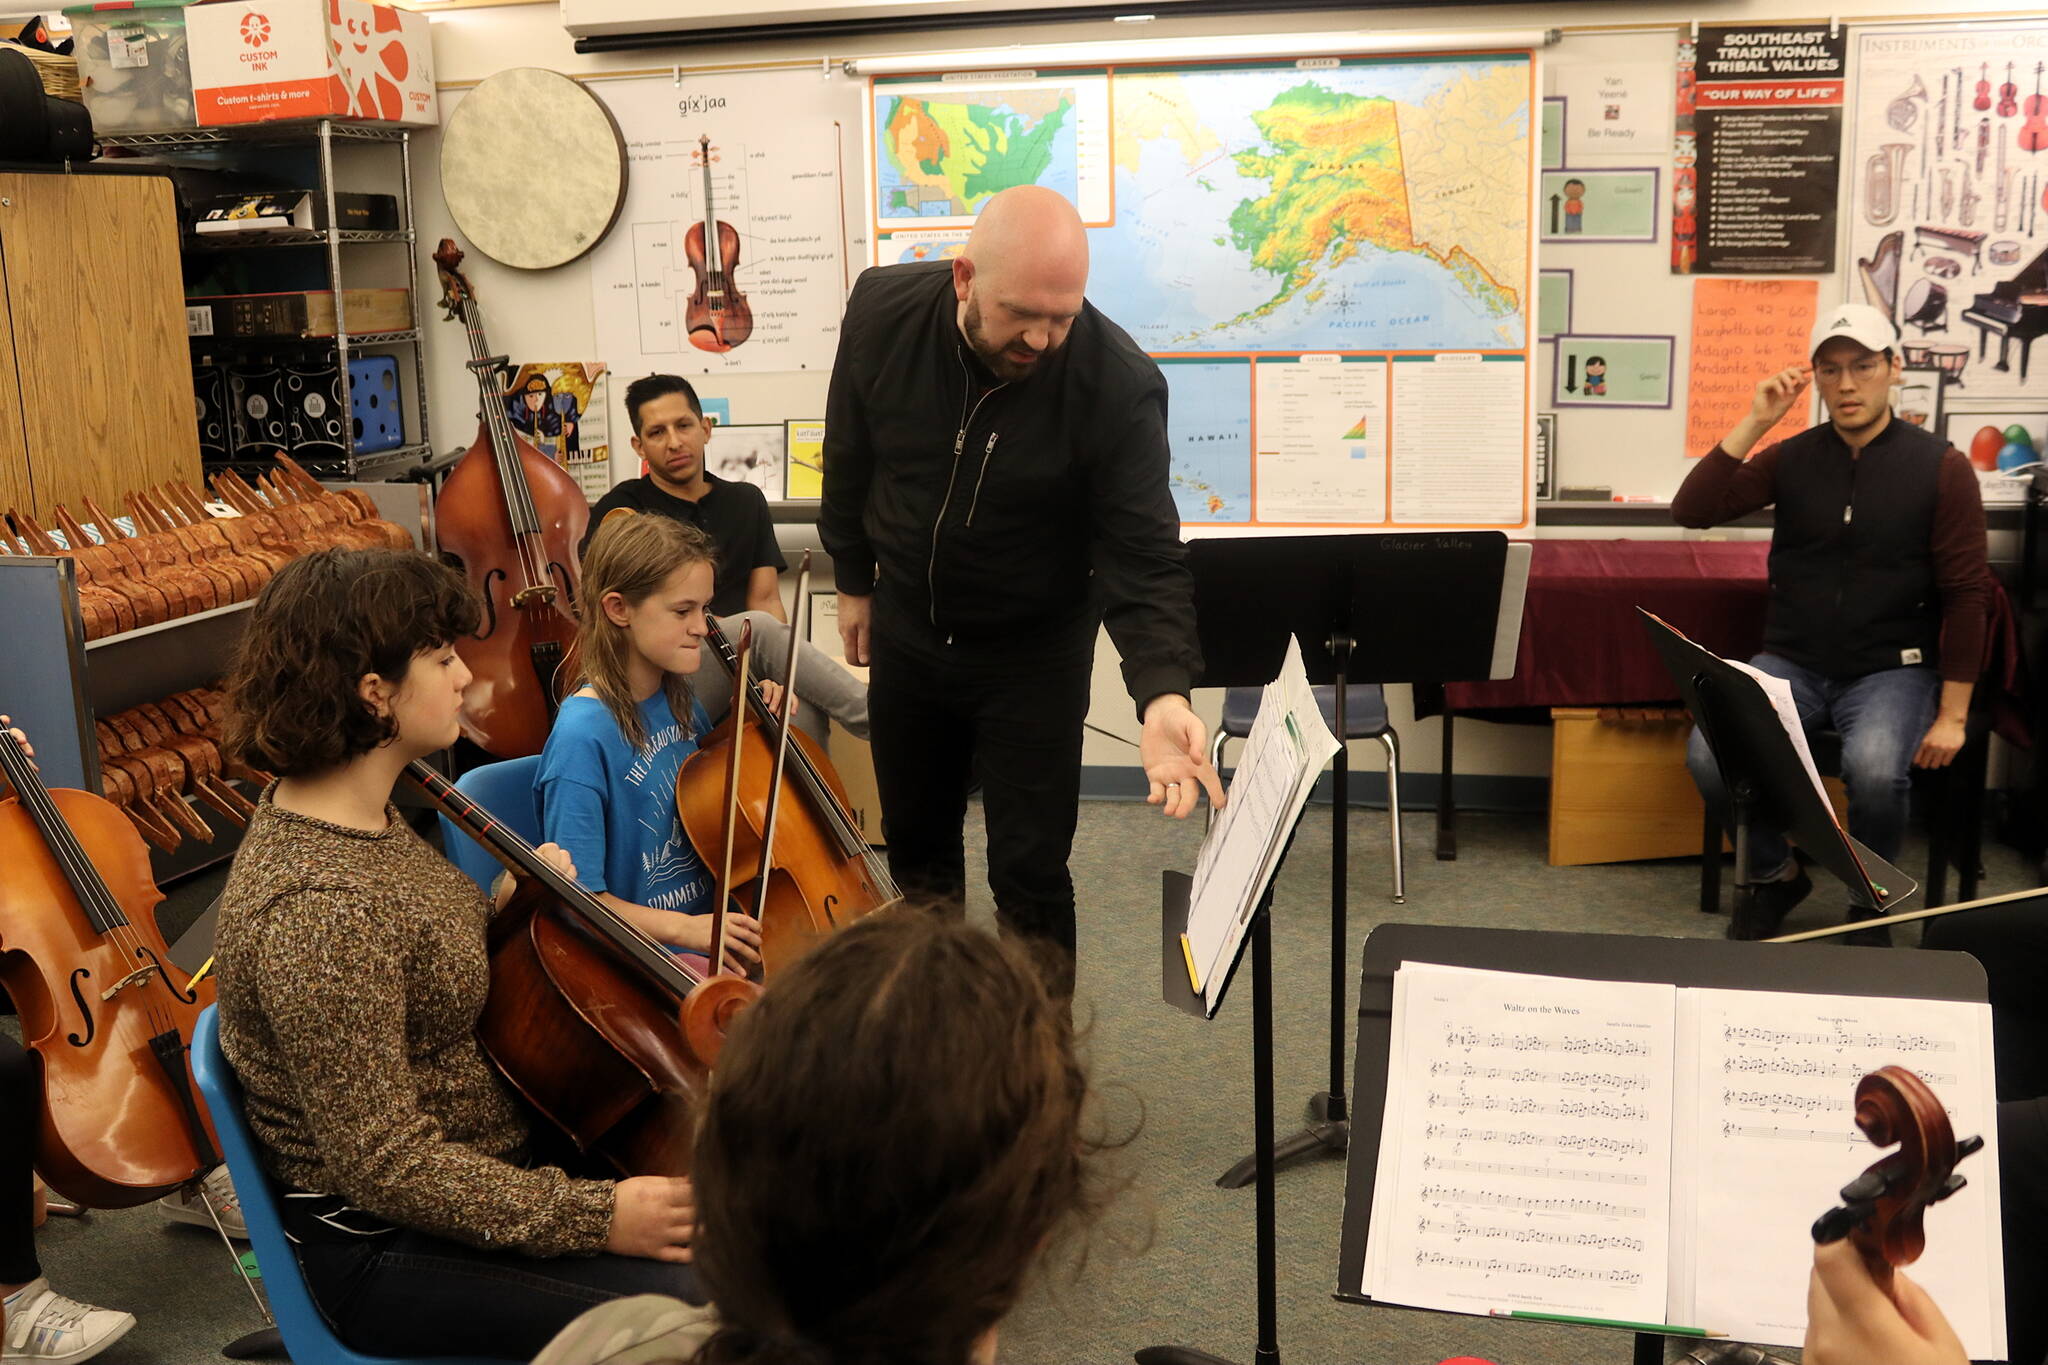 Zack Clark, right, of the visiting Simply Three string trio borrows a violin from Arlo Carlton, 12, to demonstrate a technique during a workshop Friday evening at Sitʼ Eeti Shaanáx̱ Glacier Valley Elementary School for a dozen students in grades 6-12 who are alumni of the Juneau Alaska Music Matters (JAMM) program. The students performed a 30-minute concert Saturday night at Juneau-Douglas High School: Yadaa.at Kalé before Simply Three took the stage to perform the finale of the fall Juneau Jazz Classics festival. (Mark Sabbatini / Juneau Empire)
Glen McDaniel, the cellist for Simply Three, explains a playing technique to students in the Juneau Alaska Music Matters (JAMM) program during a workshop Friday at Sitʼ Eeti Shaanáx̱ Glacier Valley Elementary School. (Mark Sabbatini / Juneau Empire)